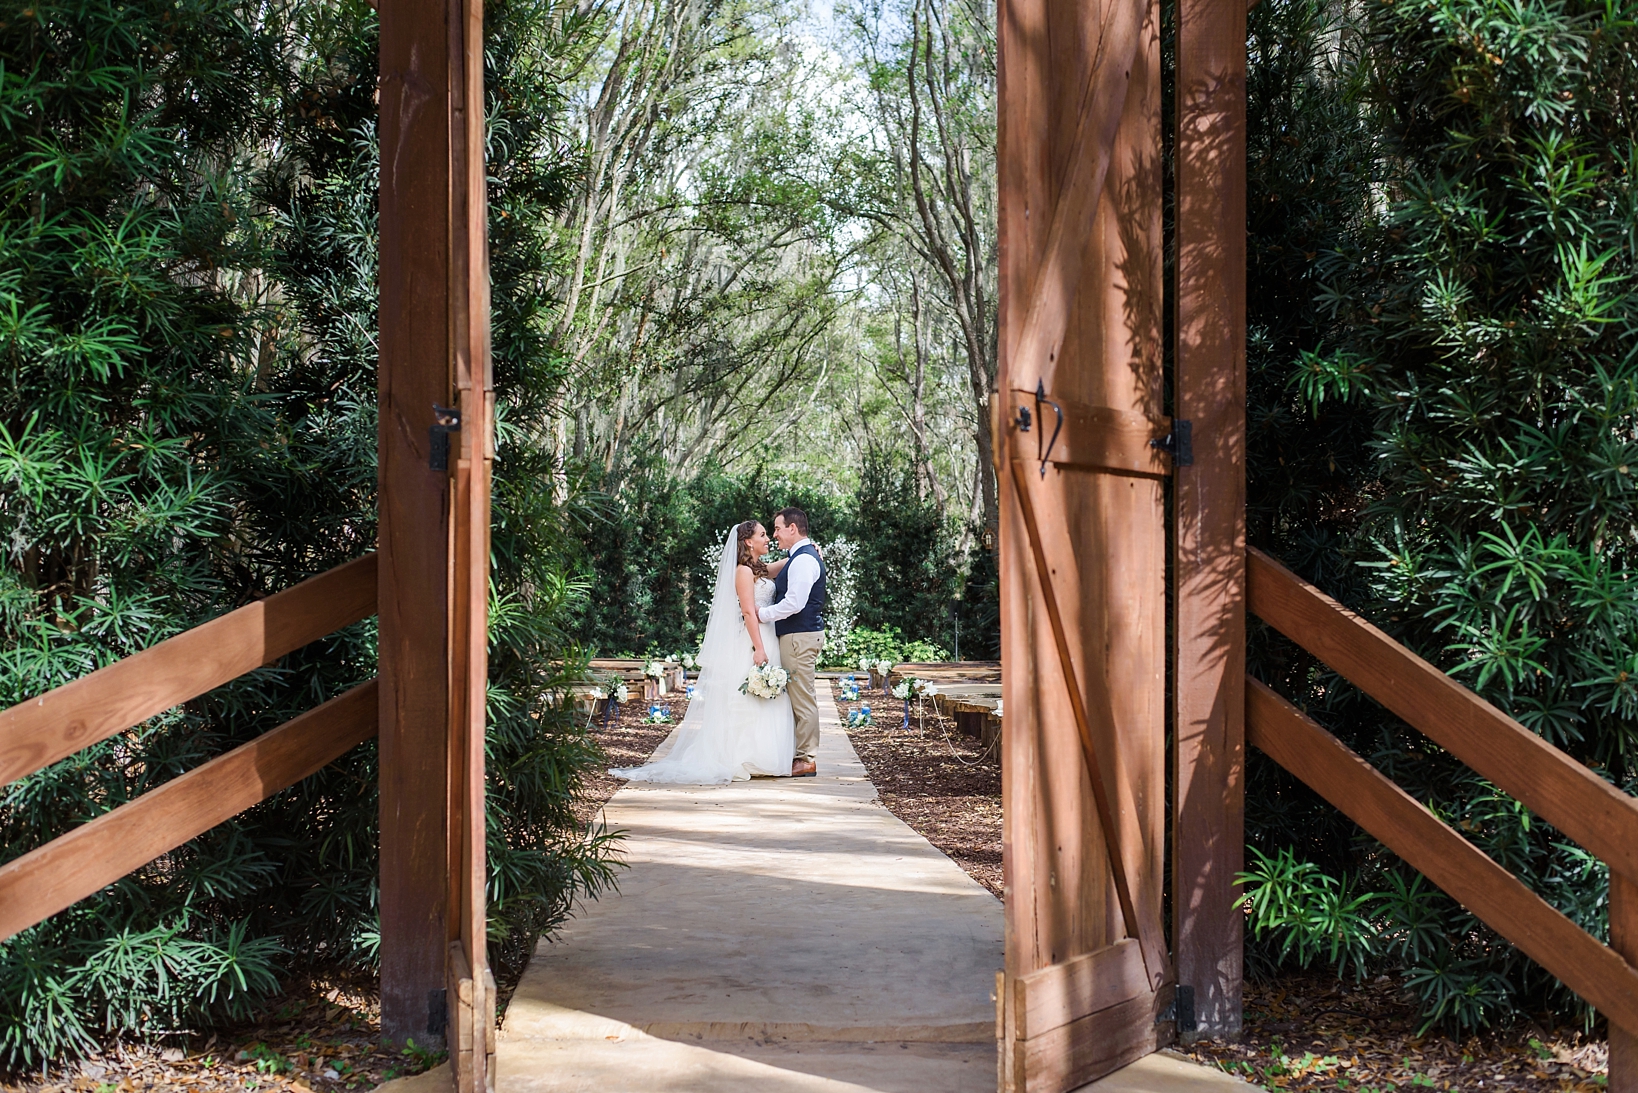 Wedding portraits of the bride and groom seen through a door that opens toward the ceremony